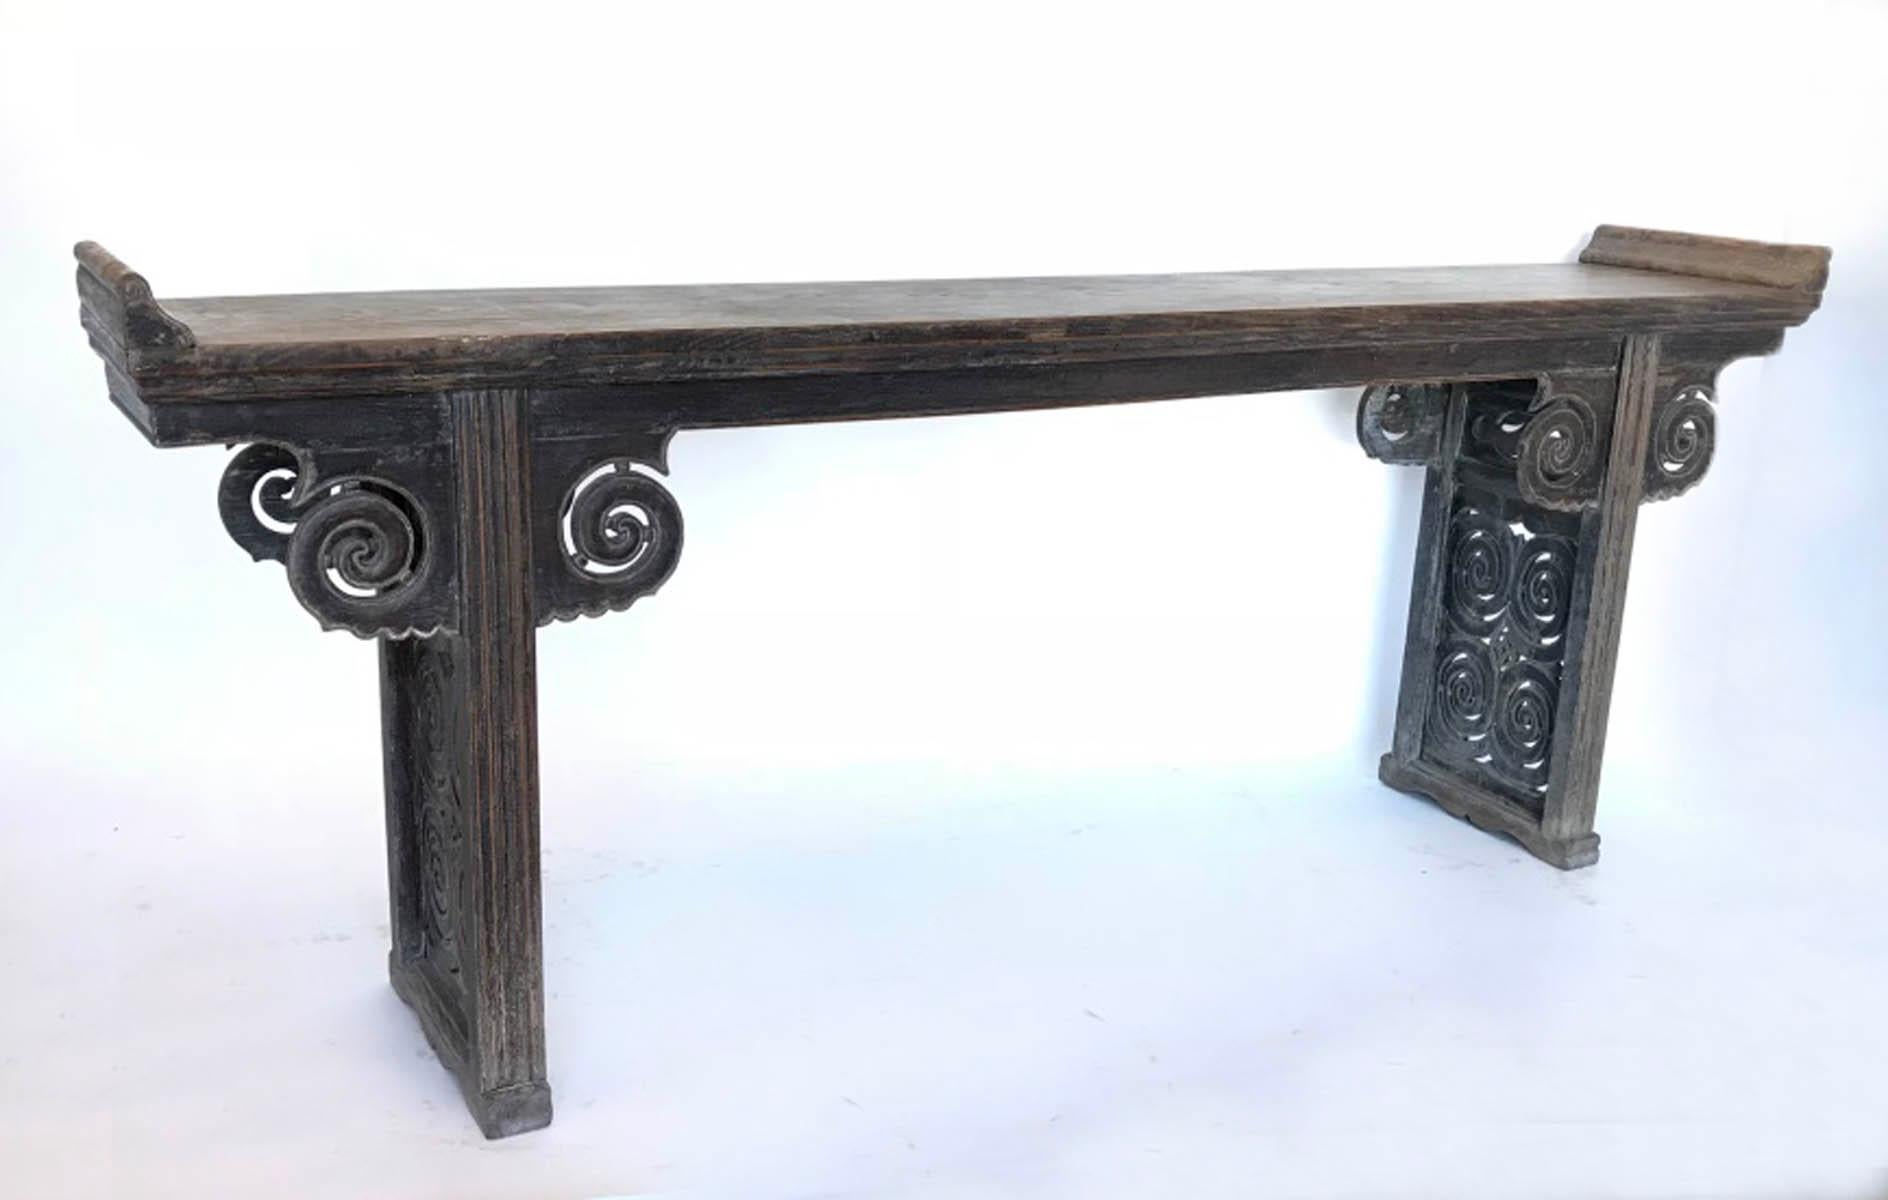 18th-19th century temple altar table from China. Elm wood with intricate carvings. One wide board top with beautiful naturally worn patina. Remnants of old black finish throughout piece, smooth to the touch. Original nails. Back and front are